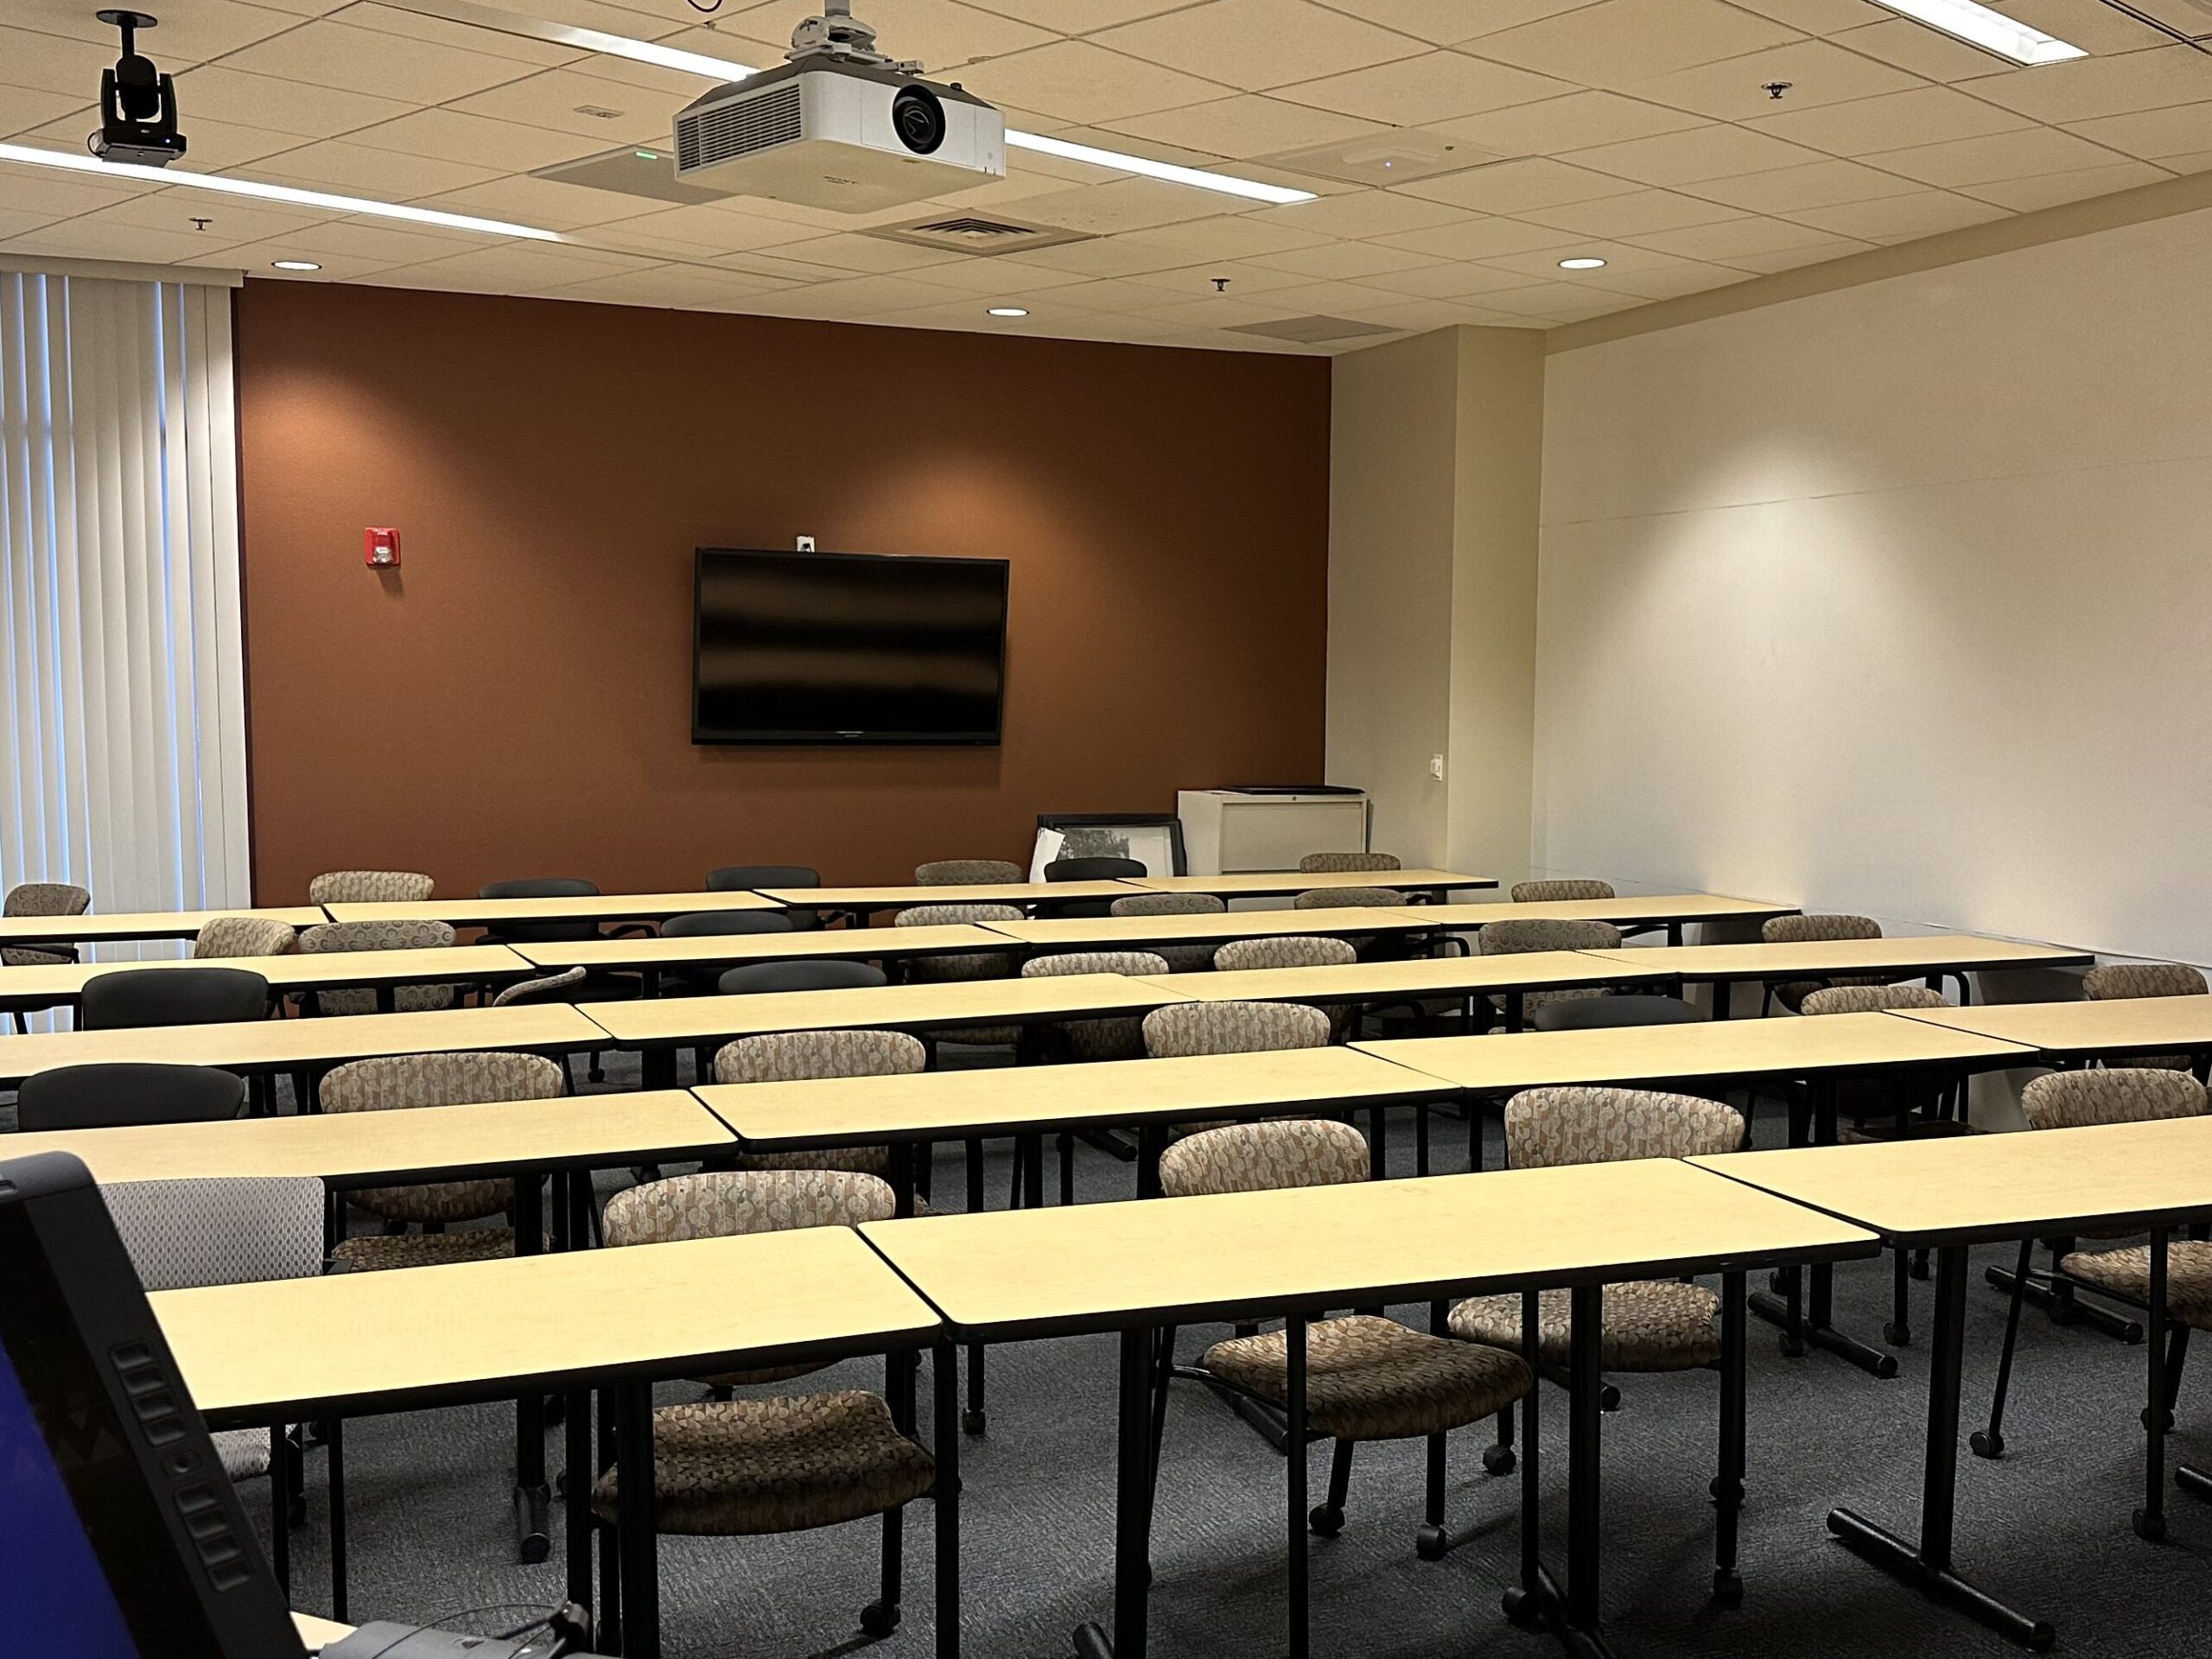 Classroom belonging to the Ira A. Fulton Schools of Engineering. Shown are many desks and chairs and a projector, a monitor on the back wall and ceiling microphone.